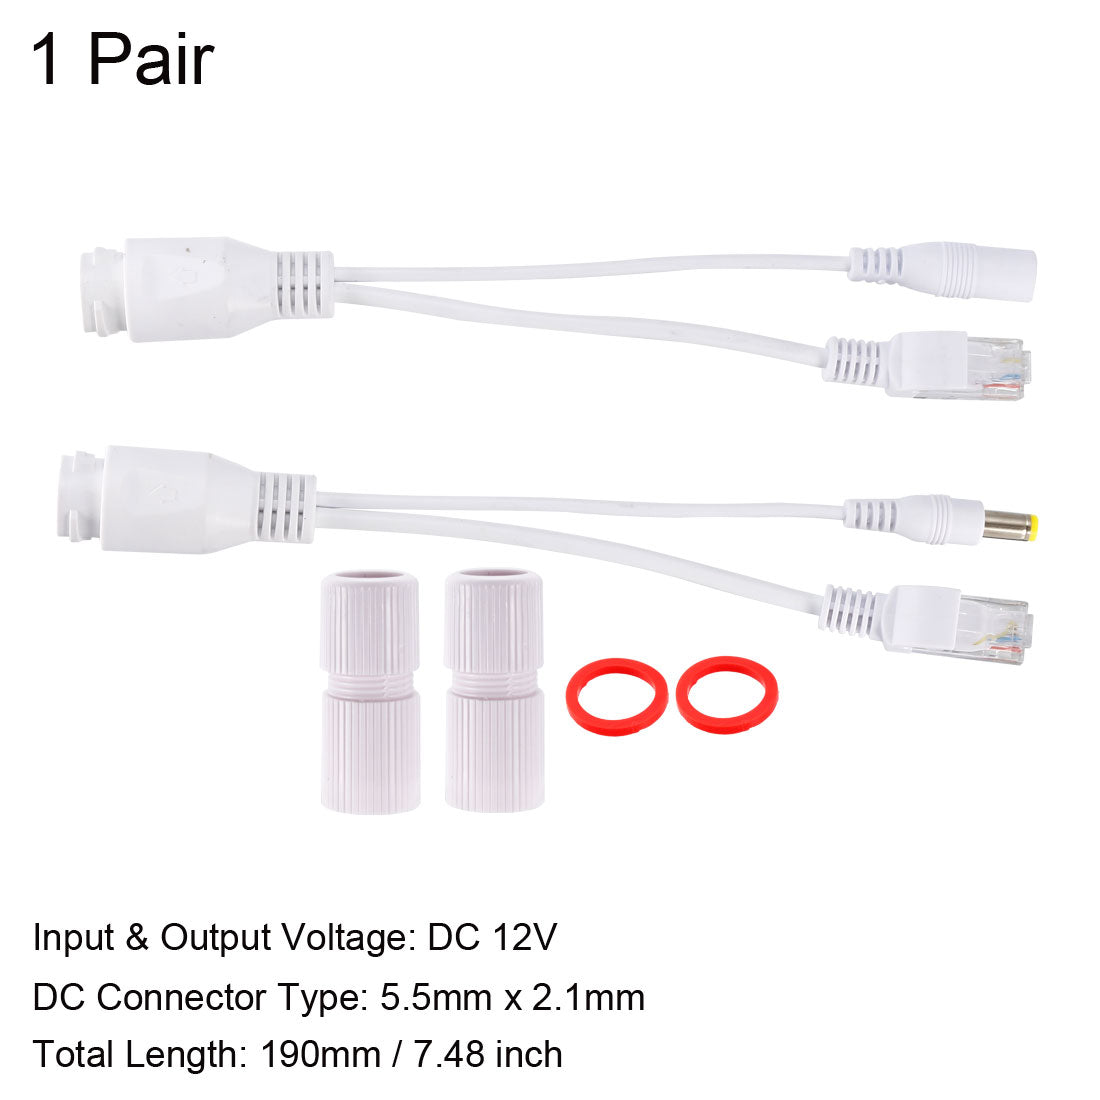 uxcell Uxcell 1pair POE Splitter Injector Kit Waterproof Power Over Ethernet Cable Kit White with 5.5x2.1mm DC Connector